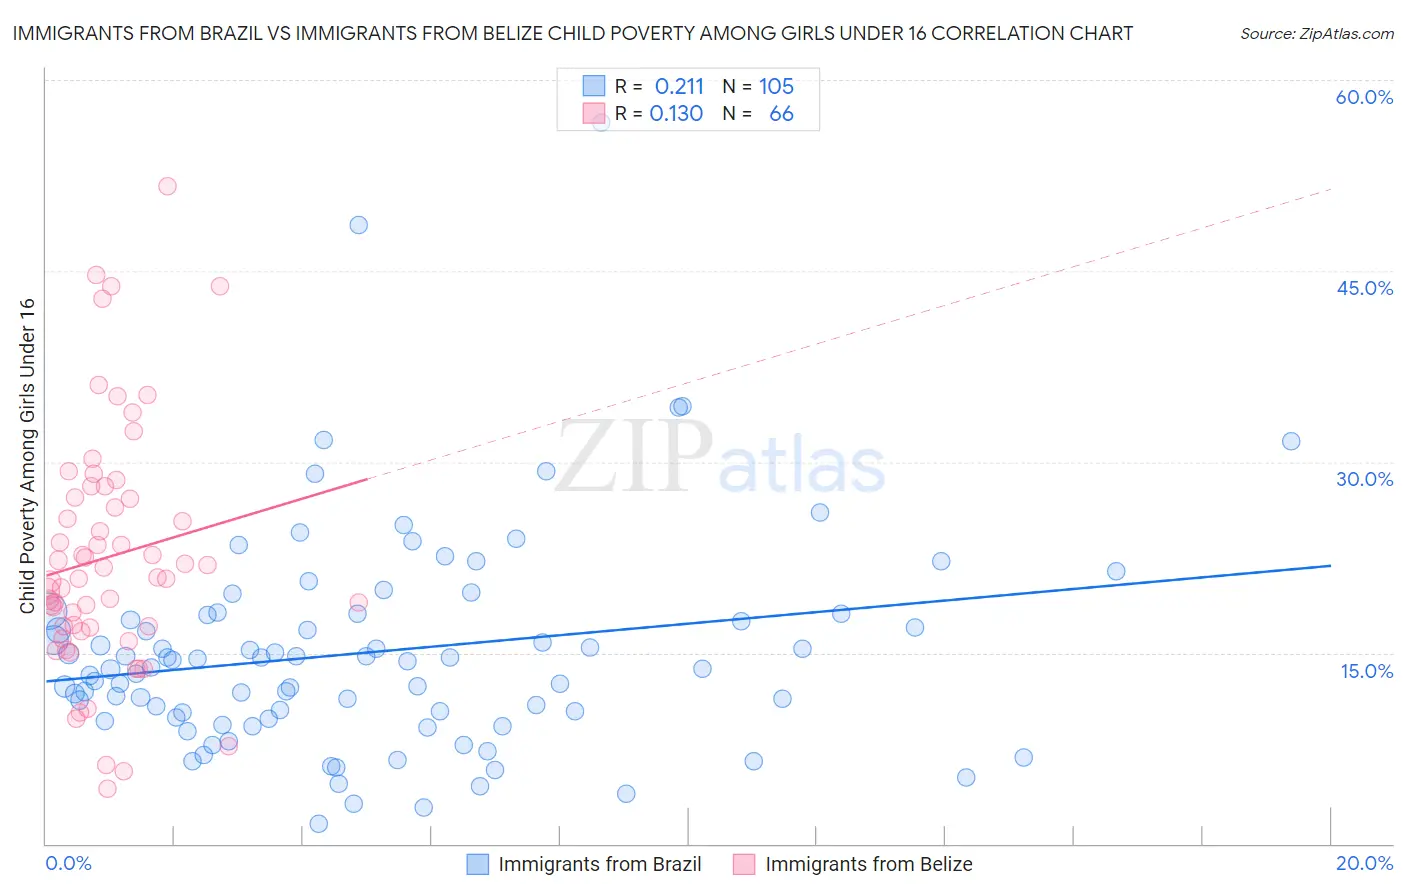 Immigrants from Brazil vs Immigrants from Belize Child Poverty Among Girls Under 16